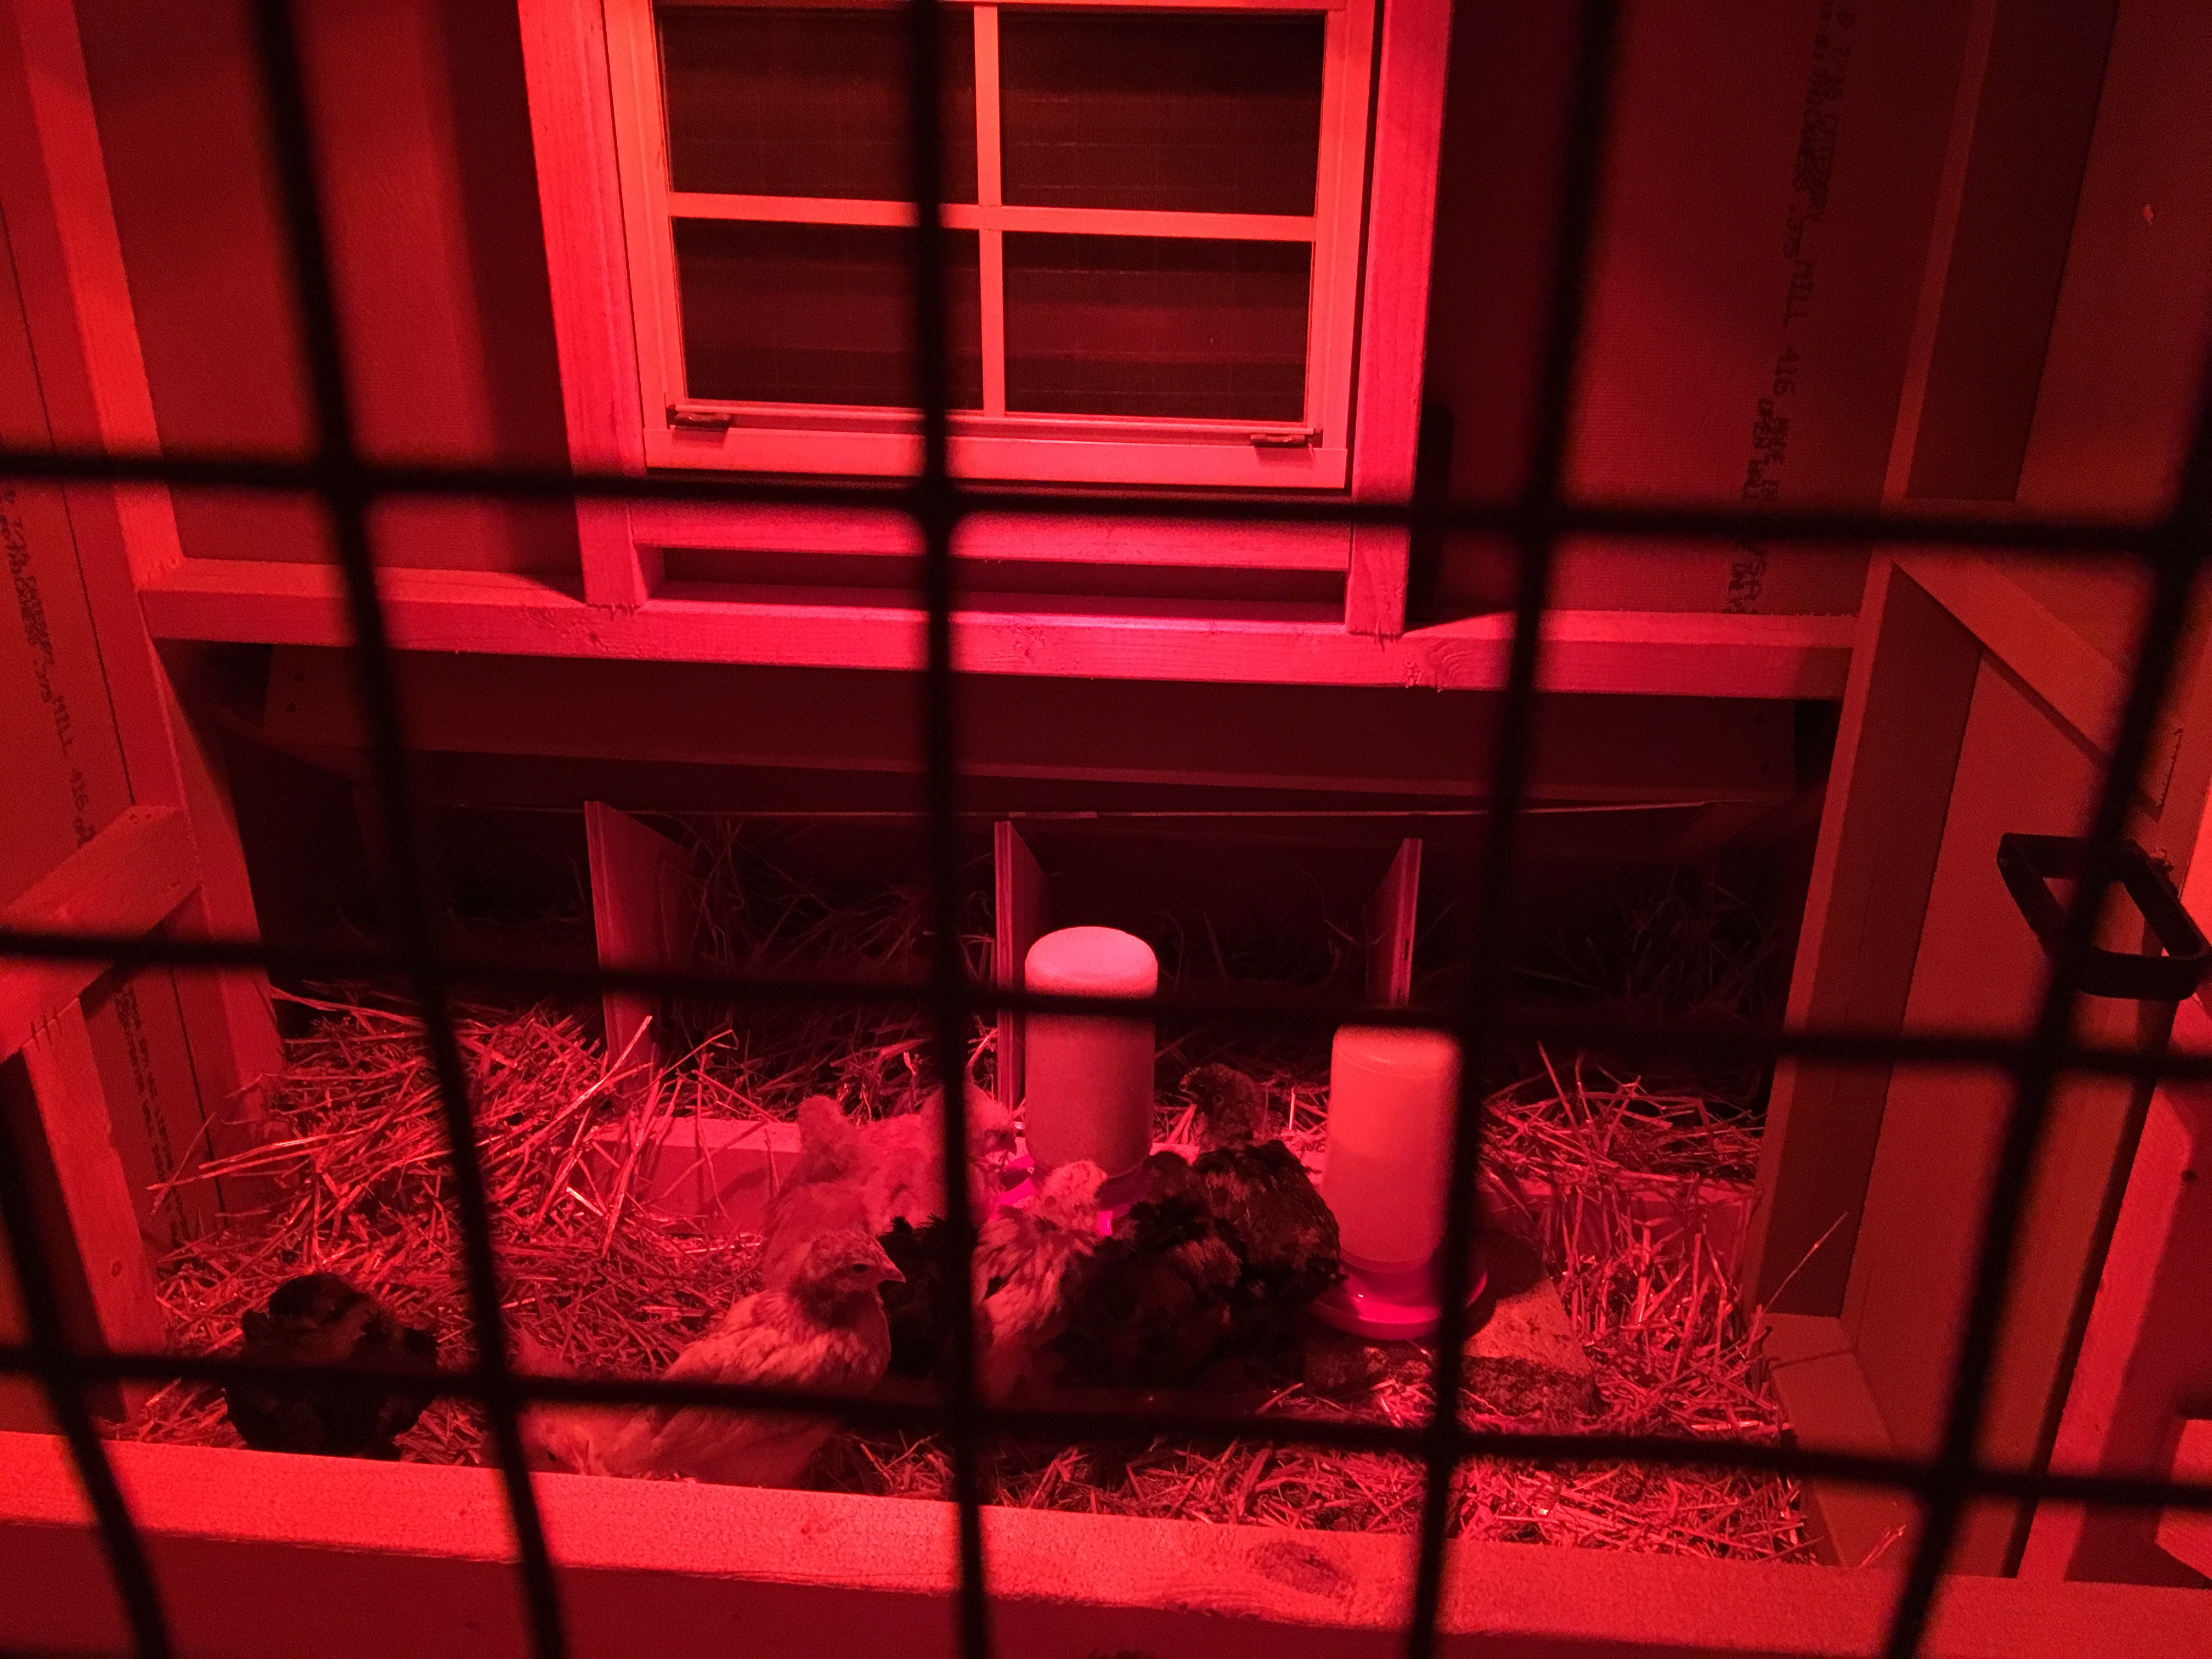 First night in the coop comforted by their familiar red heat lamp.